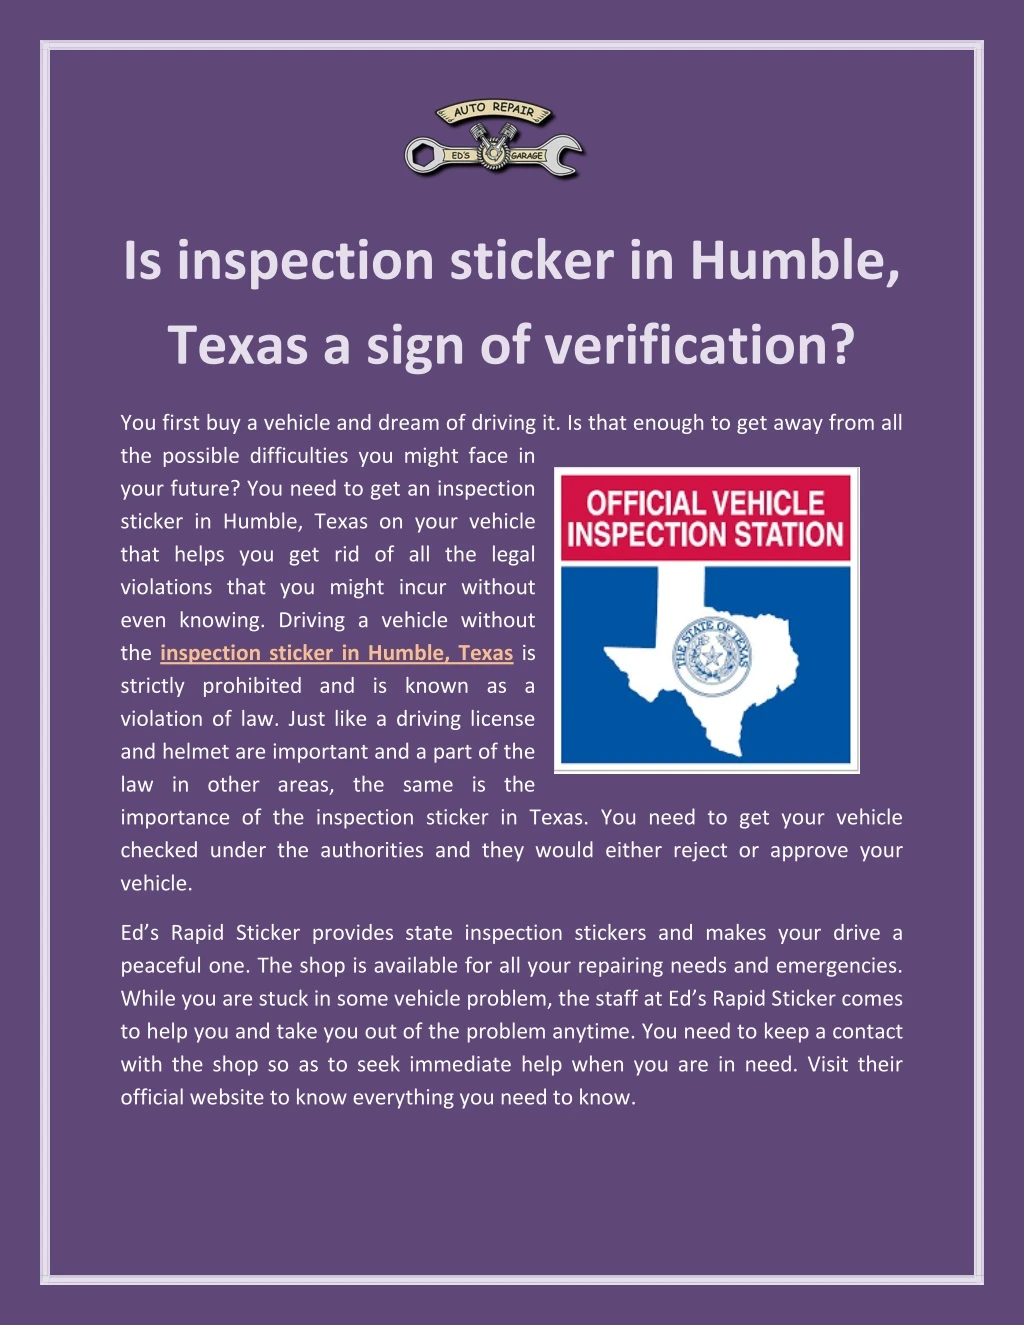 is inspection sticker in humble texas a sign